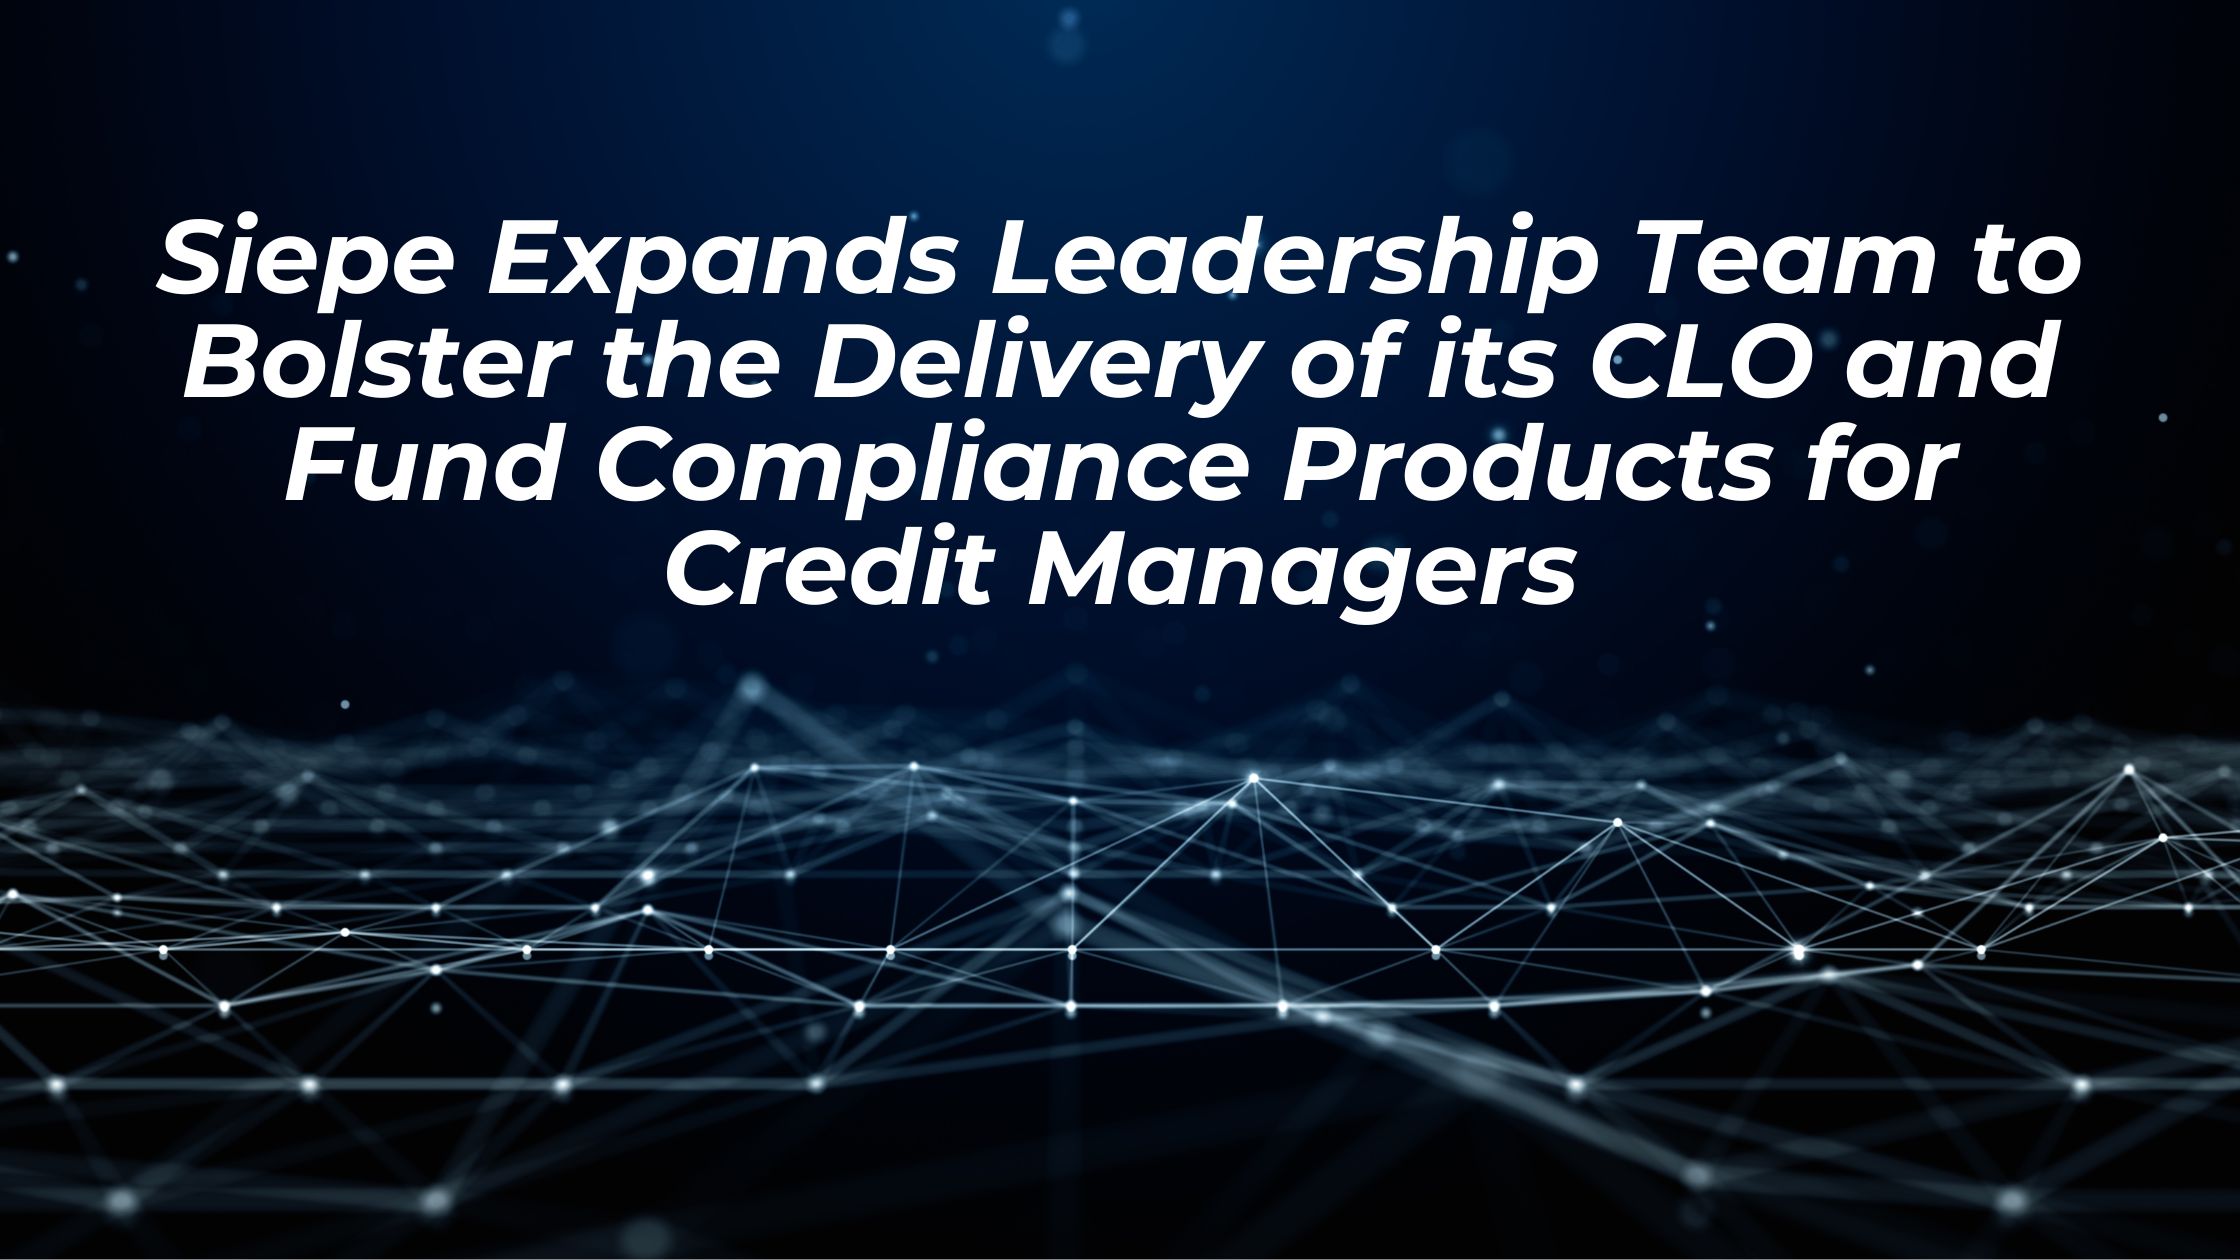 CLO and Fund Compliance Products for Credit Managers